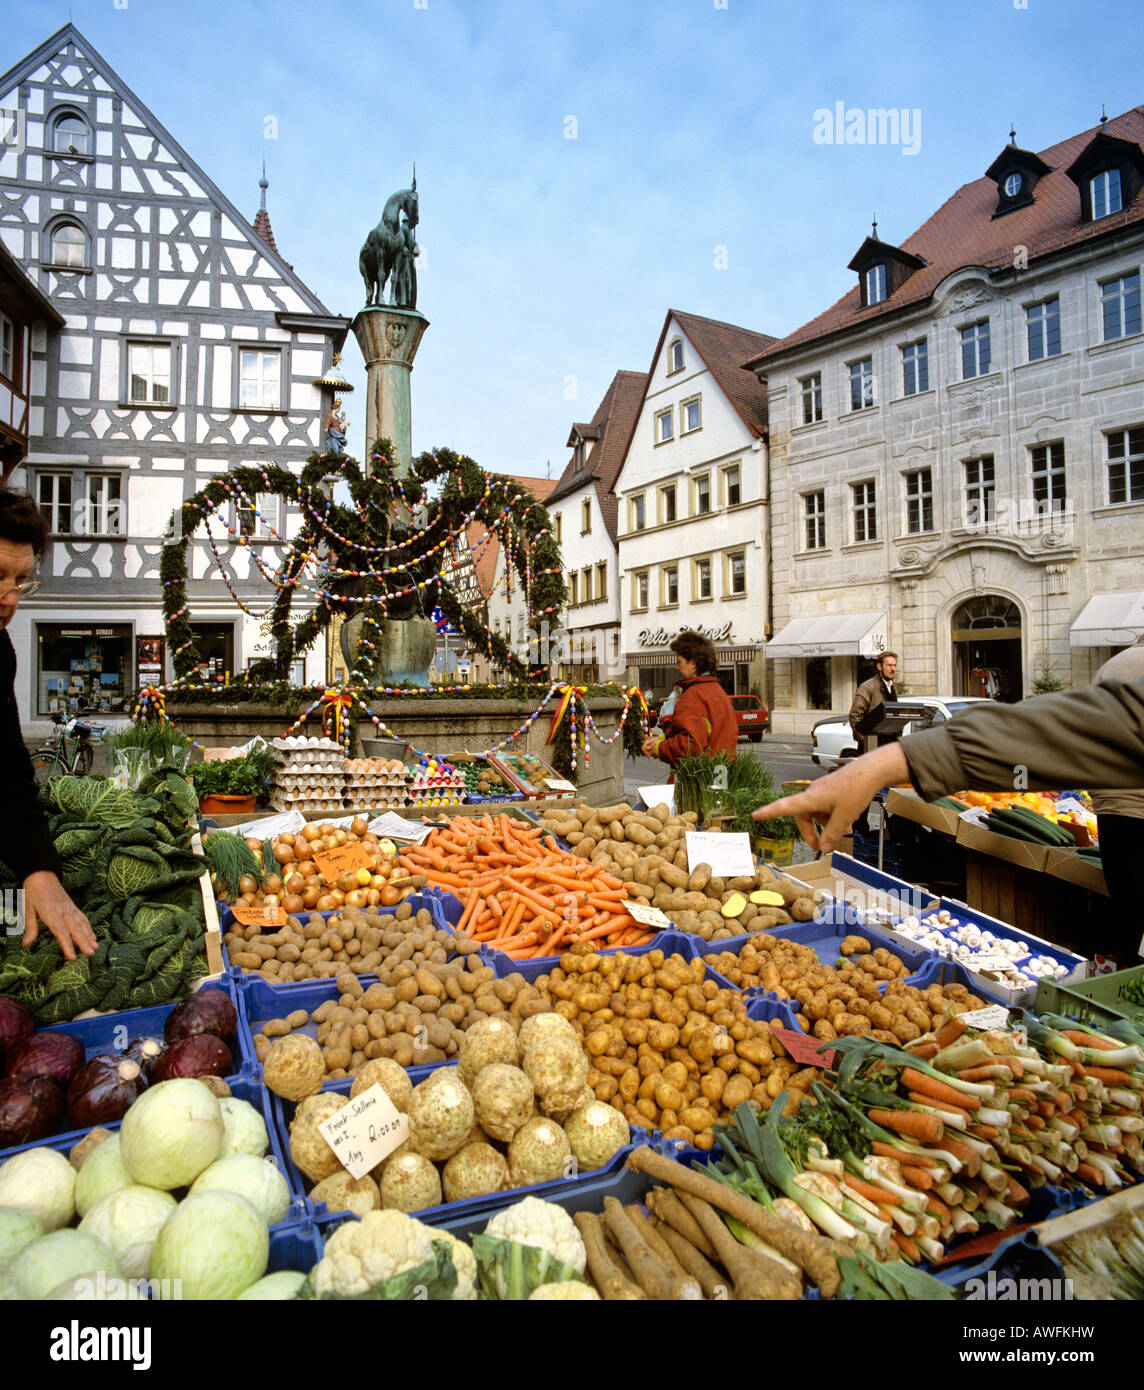 Produce stand at the market square in Forchheim, Upper Franconia, Bavaria, Germany, Europe Stock Photo